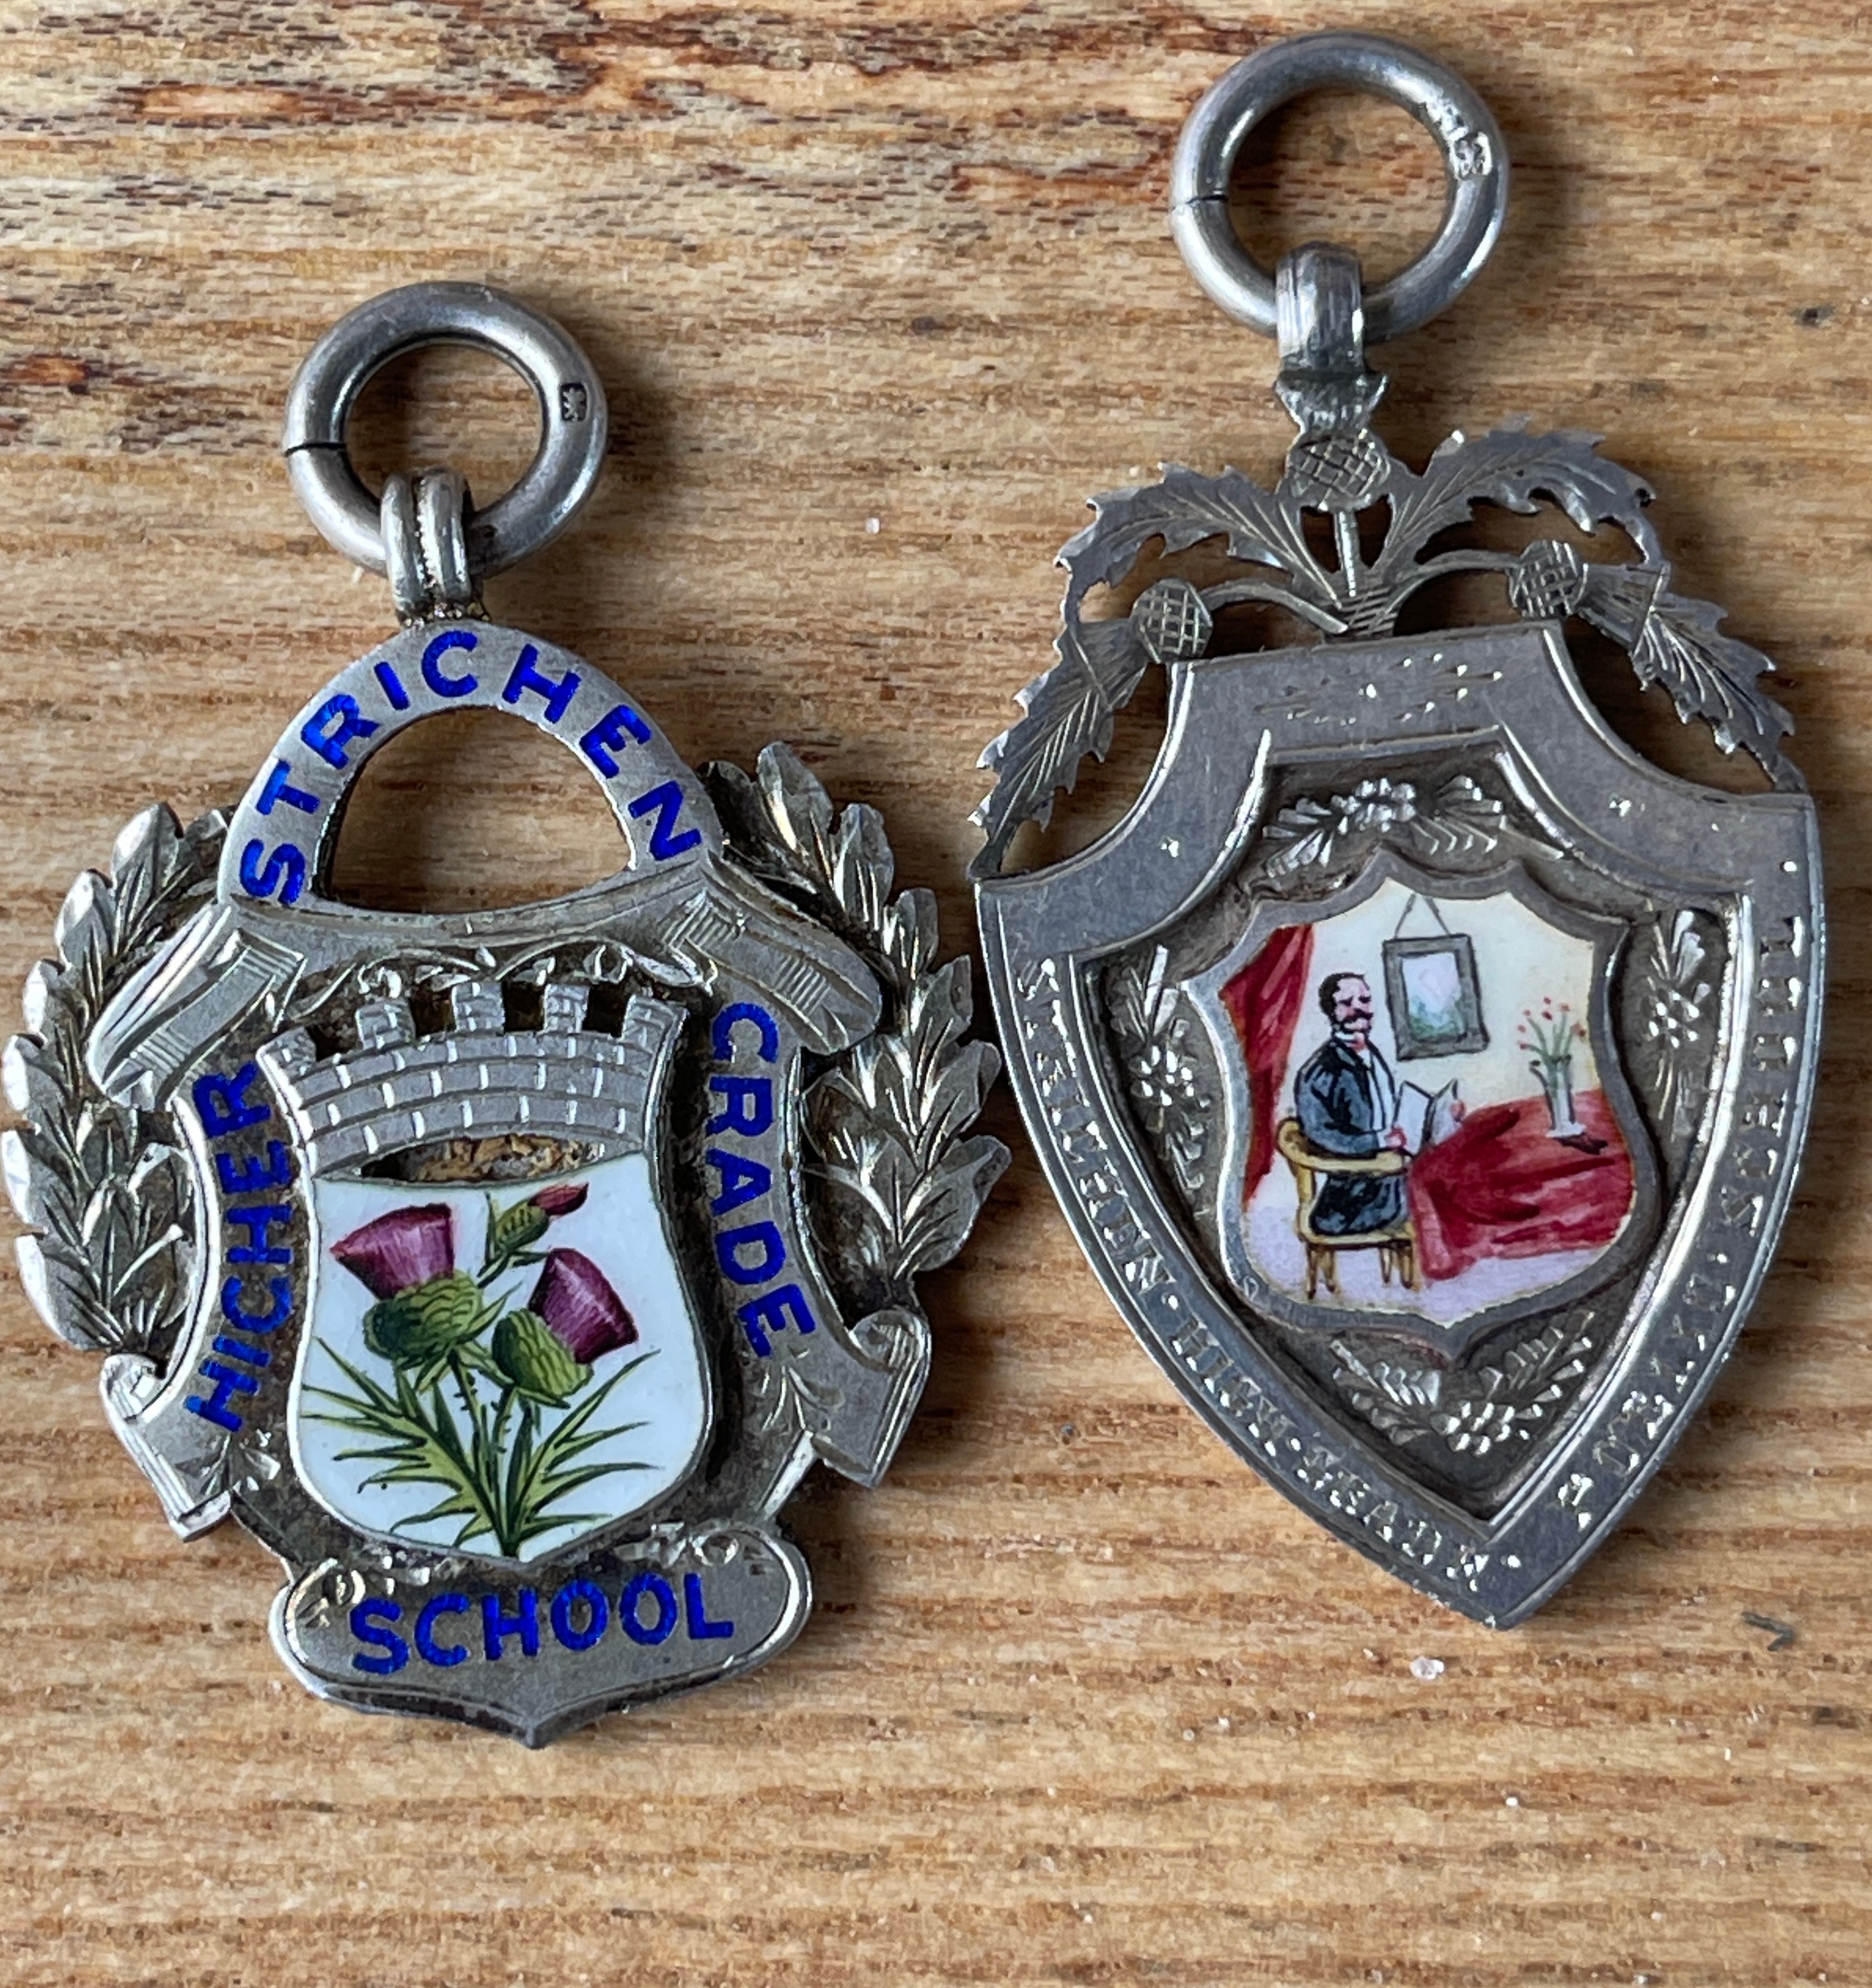 Duo of Silver Strichen Higher Grade School Medals awarded to a Alexander Keith - largest 40mm x 31mm